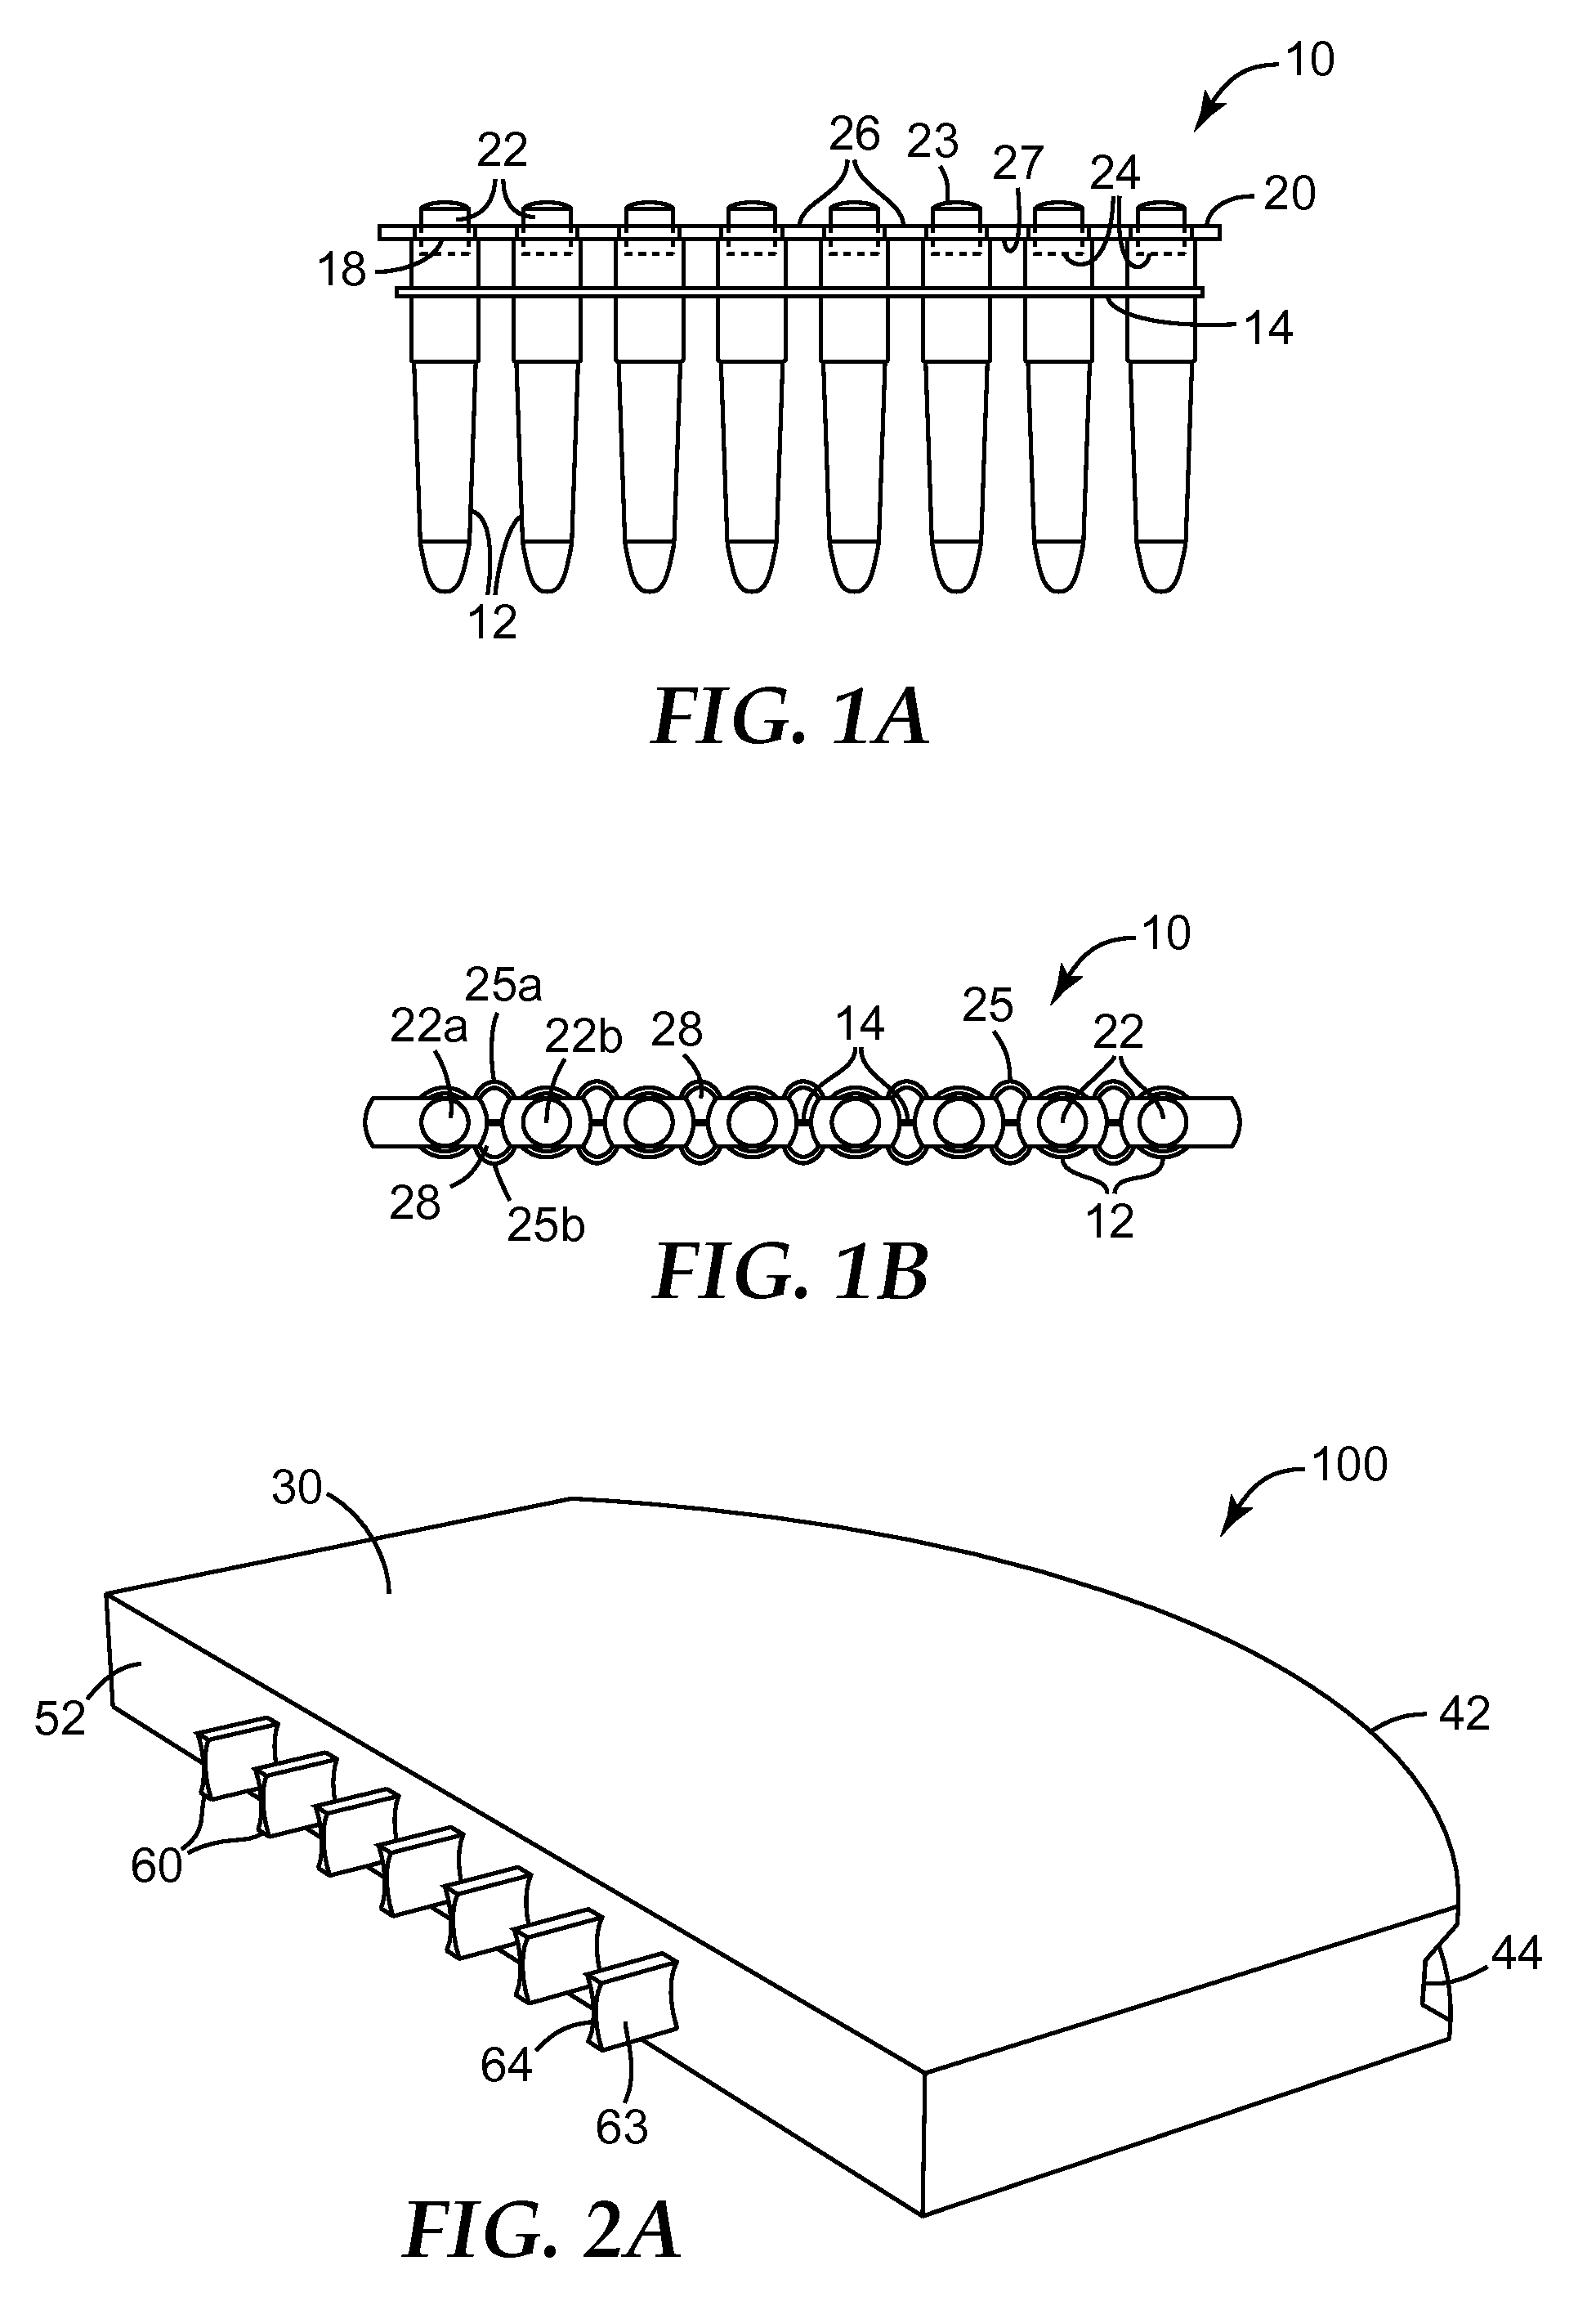 Cap handling tool and method of use